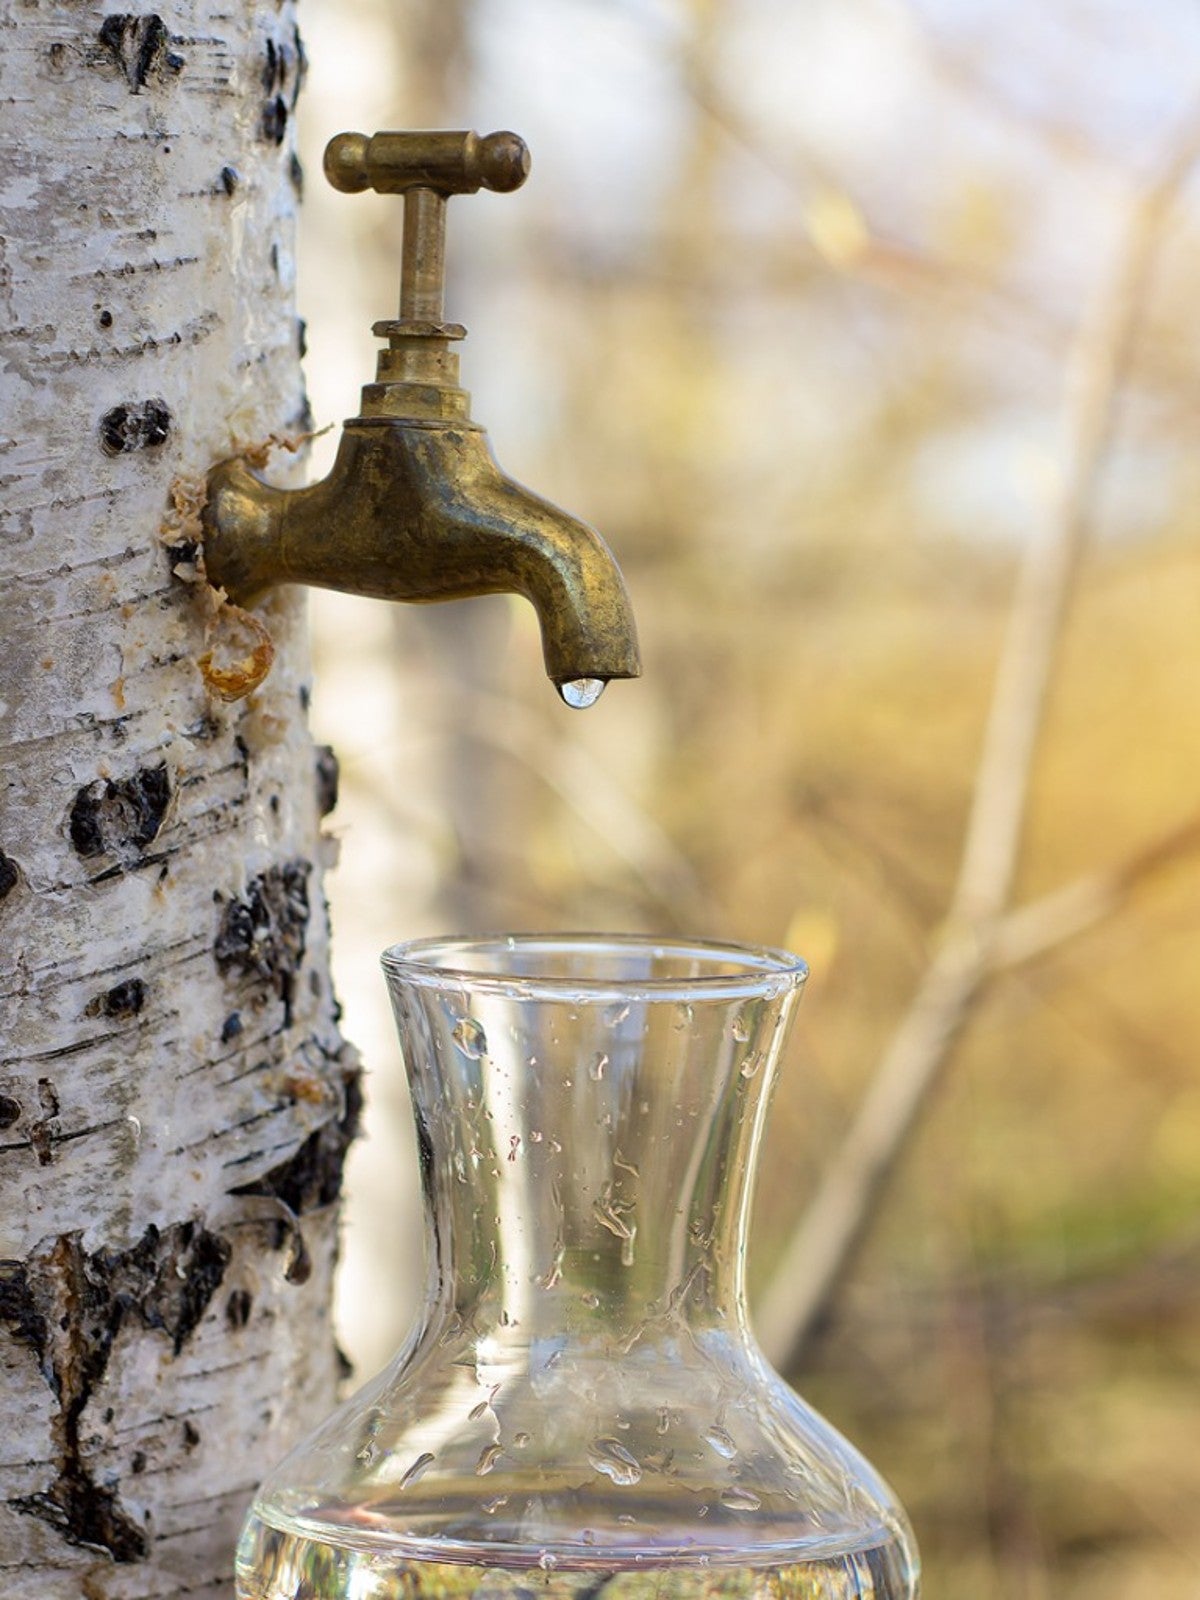 How to collect birch sap and what to use it for